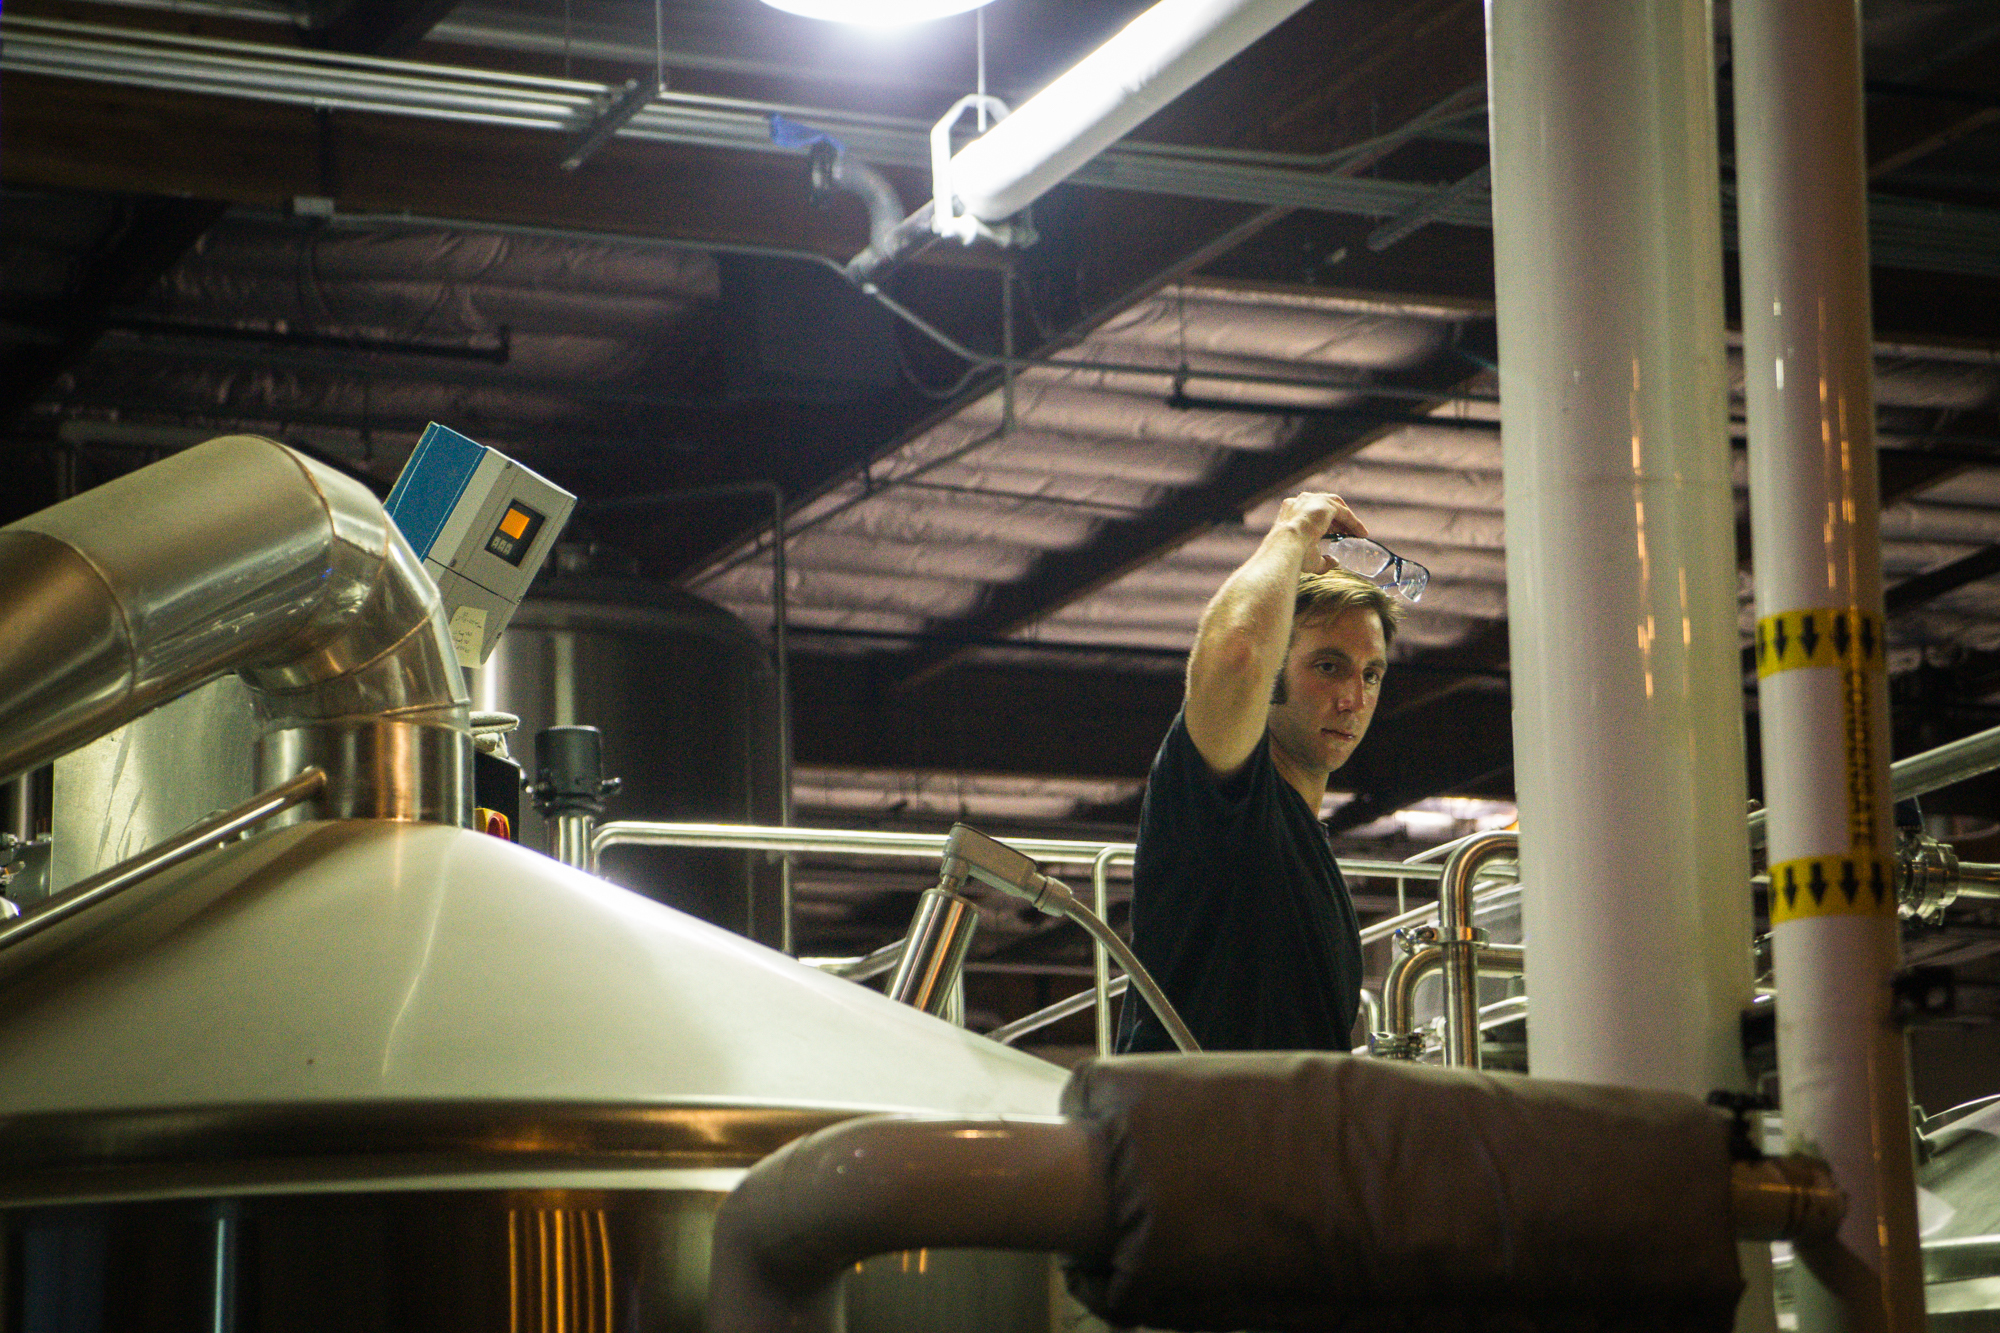 Here's a guy brewing beer, we assume.